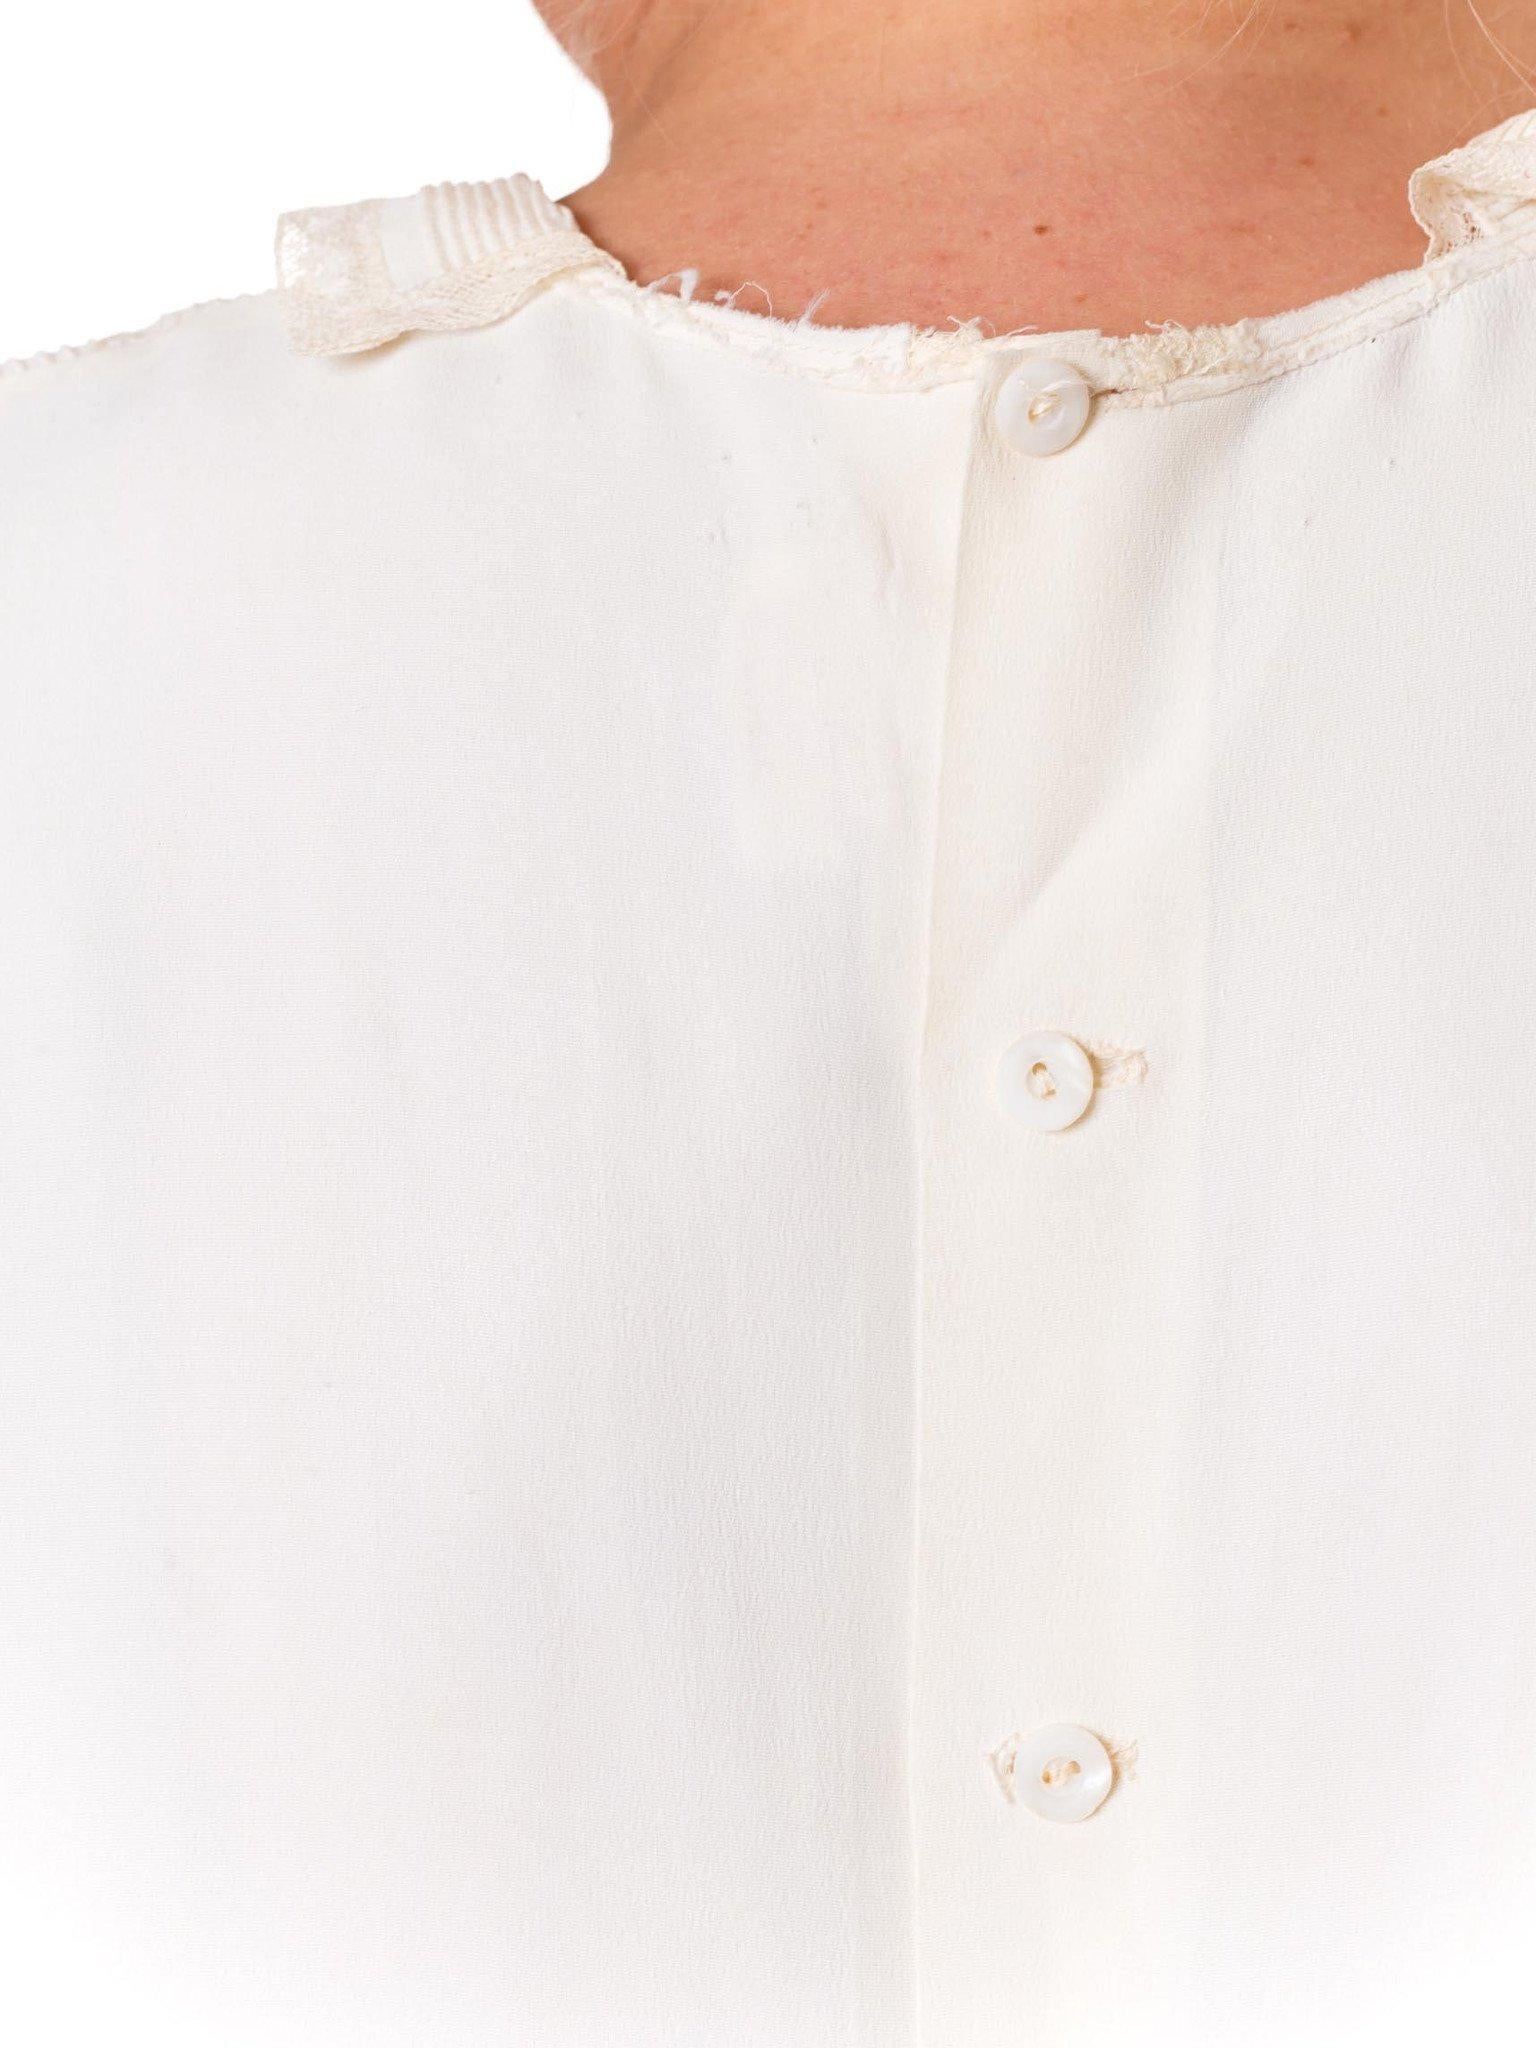 1940S  Off White Rayon Crepe Blouse With Pin-Tuck & Insertion Lace Collar In Excellent Condition For Sale In New York, NY